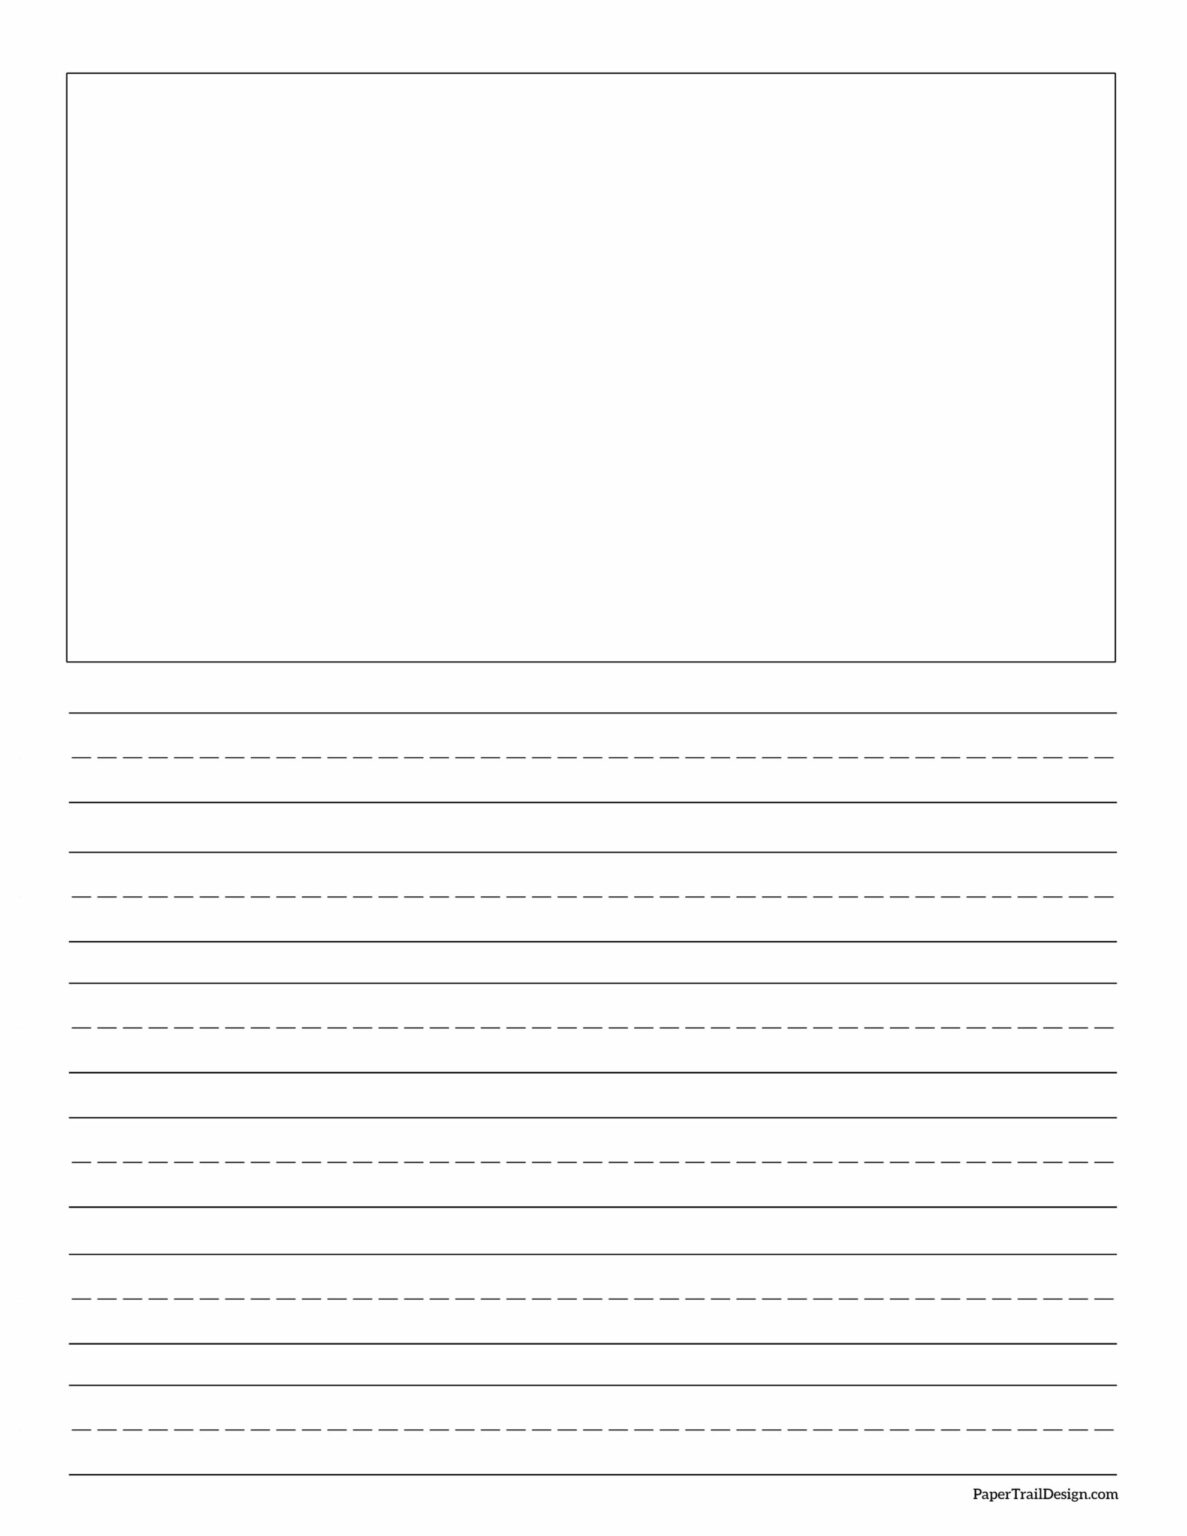 9-best-images-of-standard-printable-lined-writing-paper-bold-lined